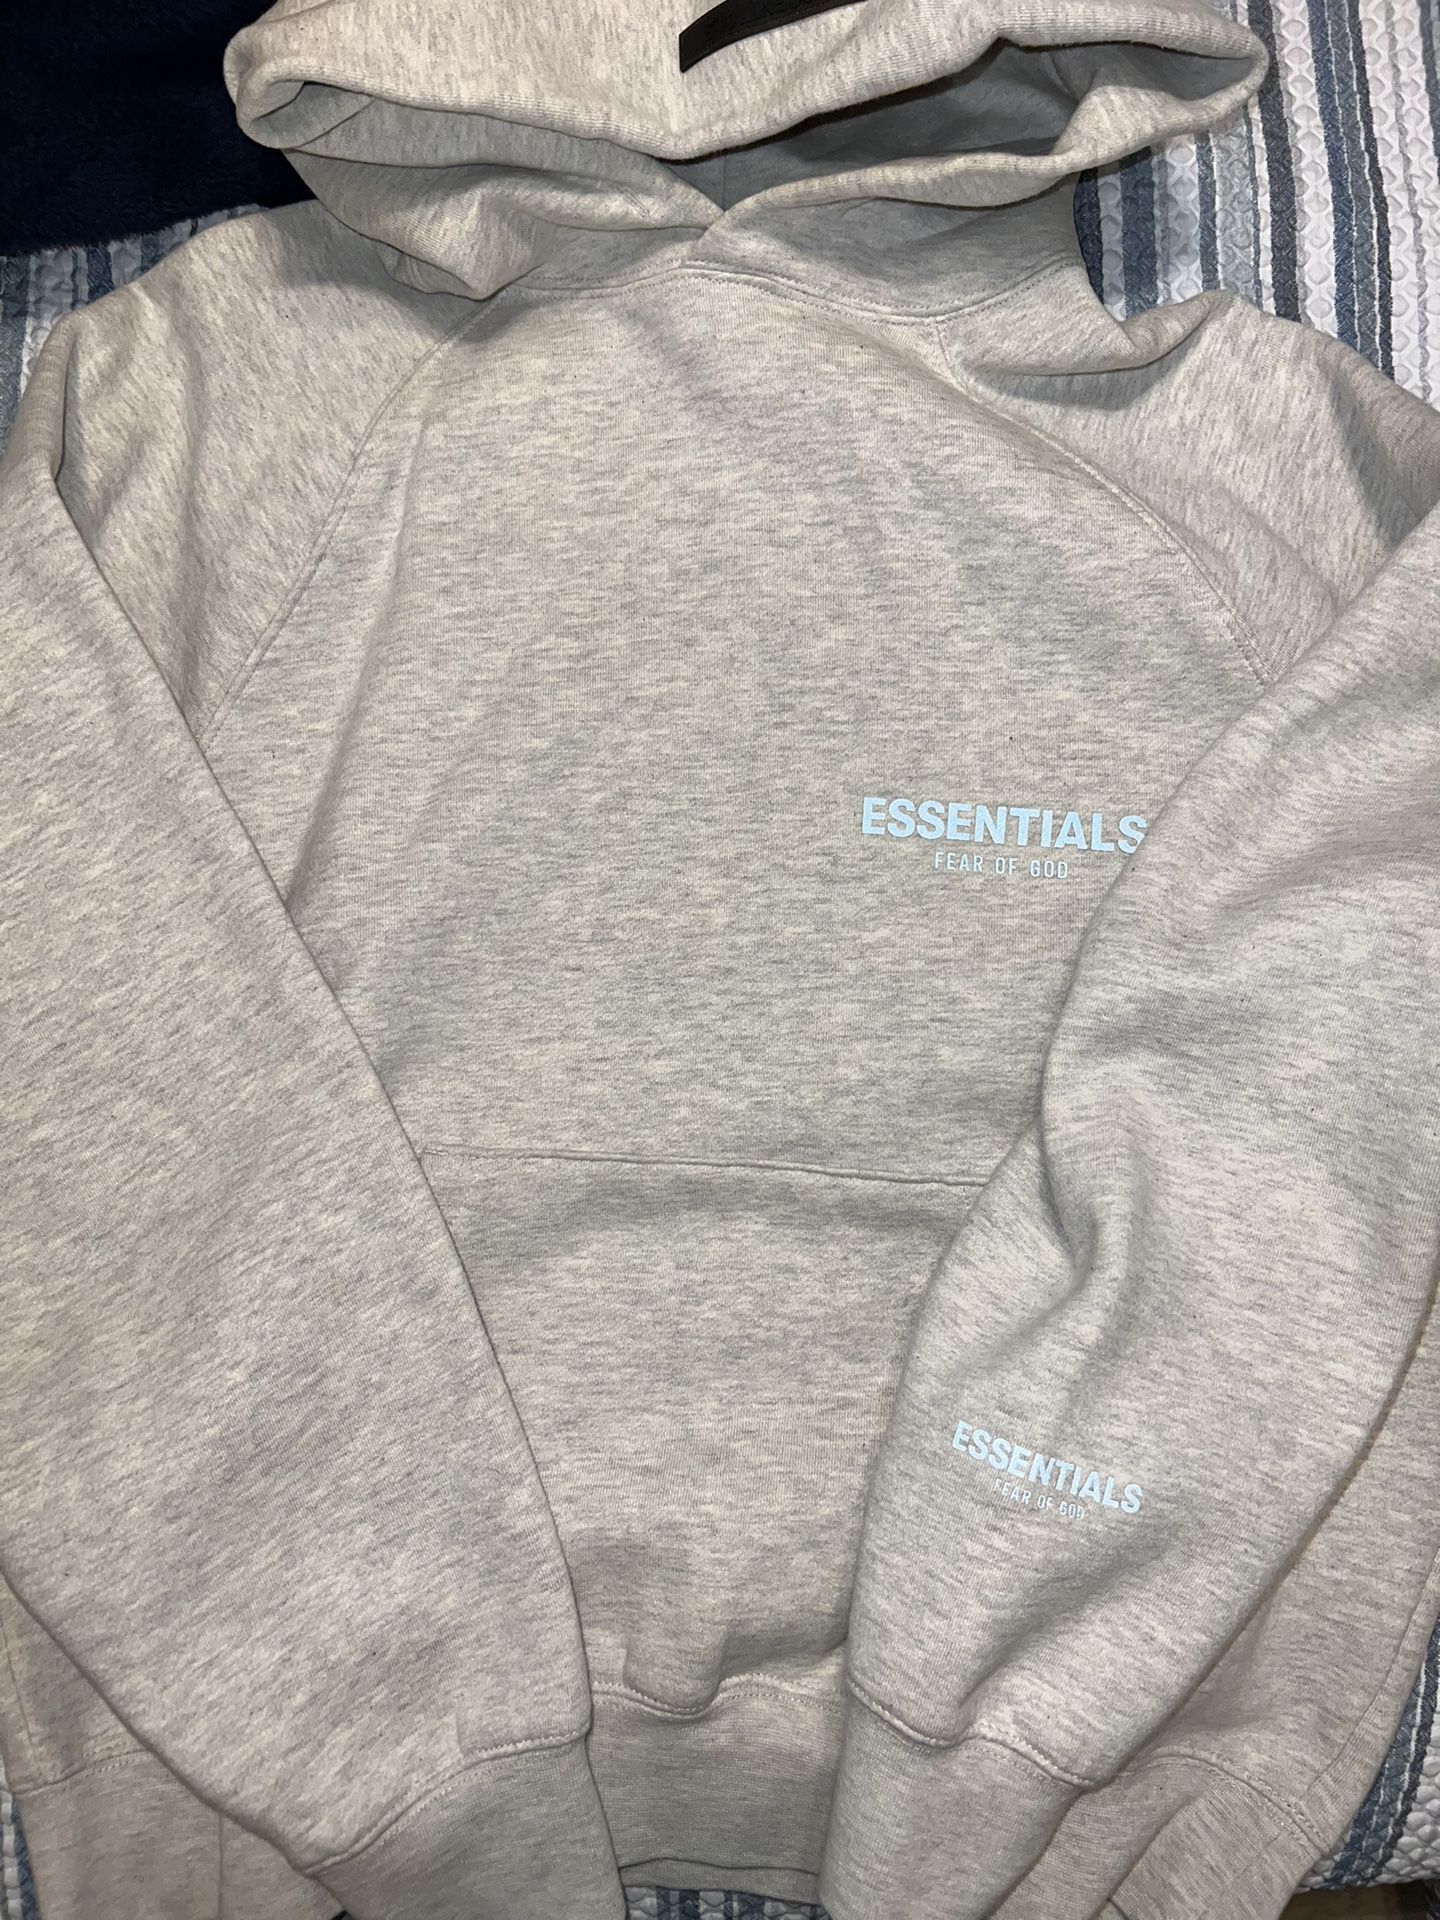 Essentials Fear Of God Oversized Hoodie 